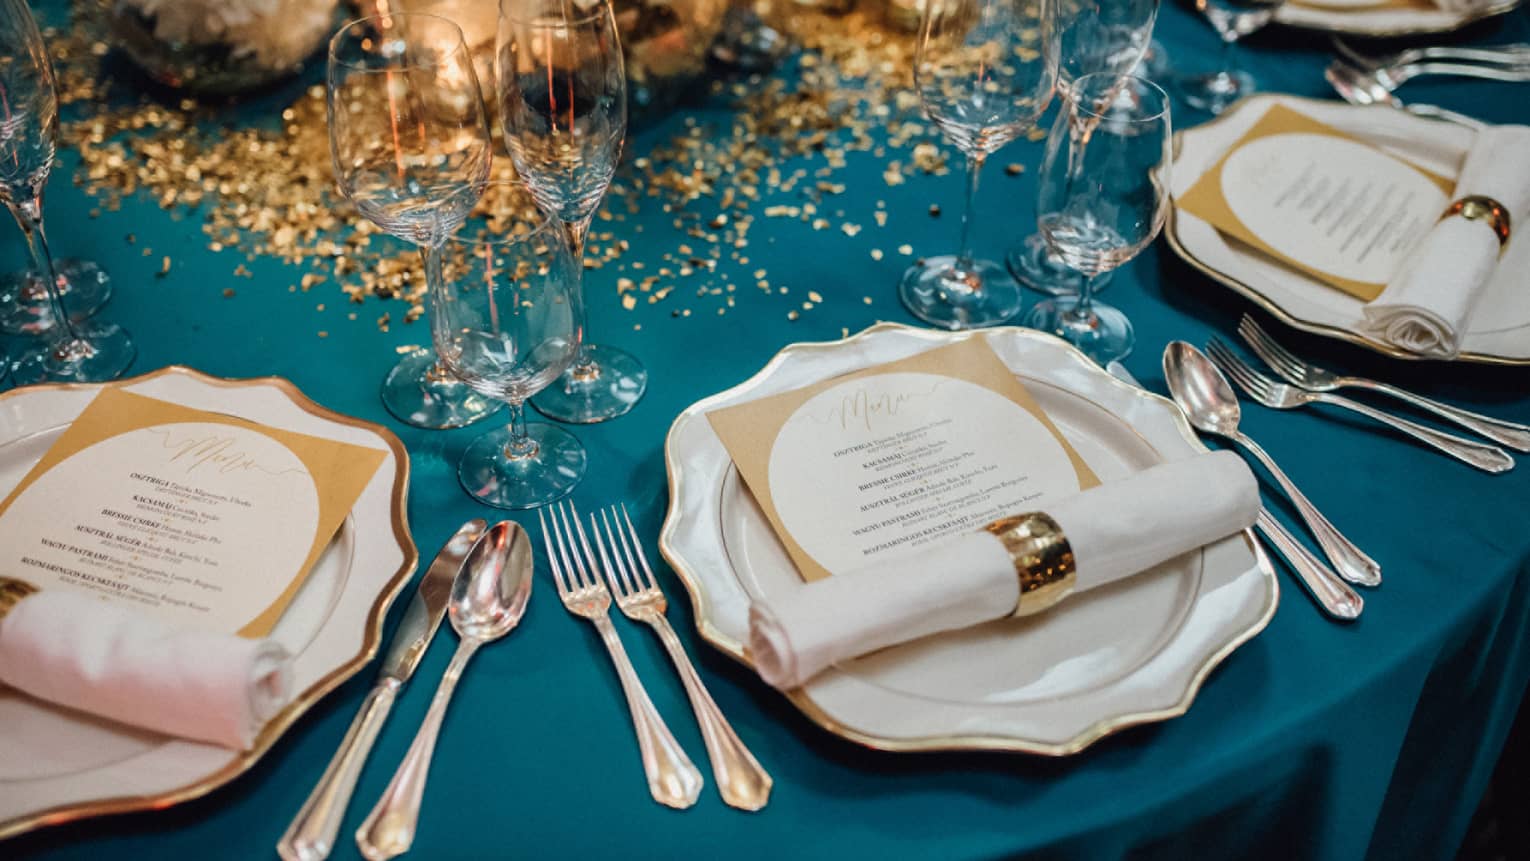 Elegant wedding banquet dining table, place settings with menus and gold accents